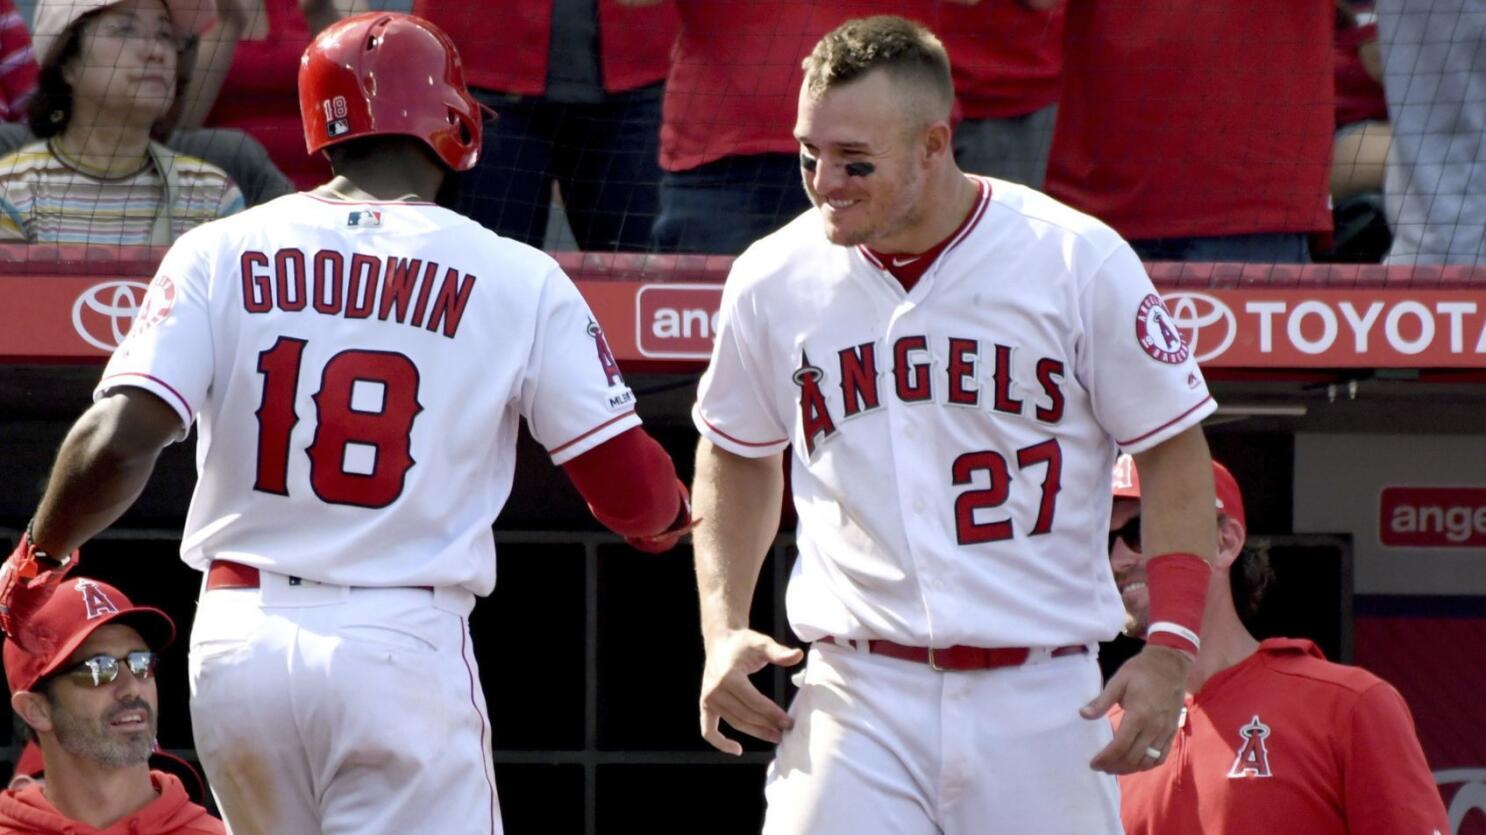 Former Bees Star Mike Trout homers in 7th straight game for Angels